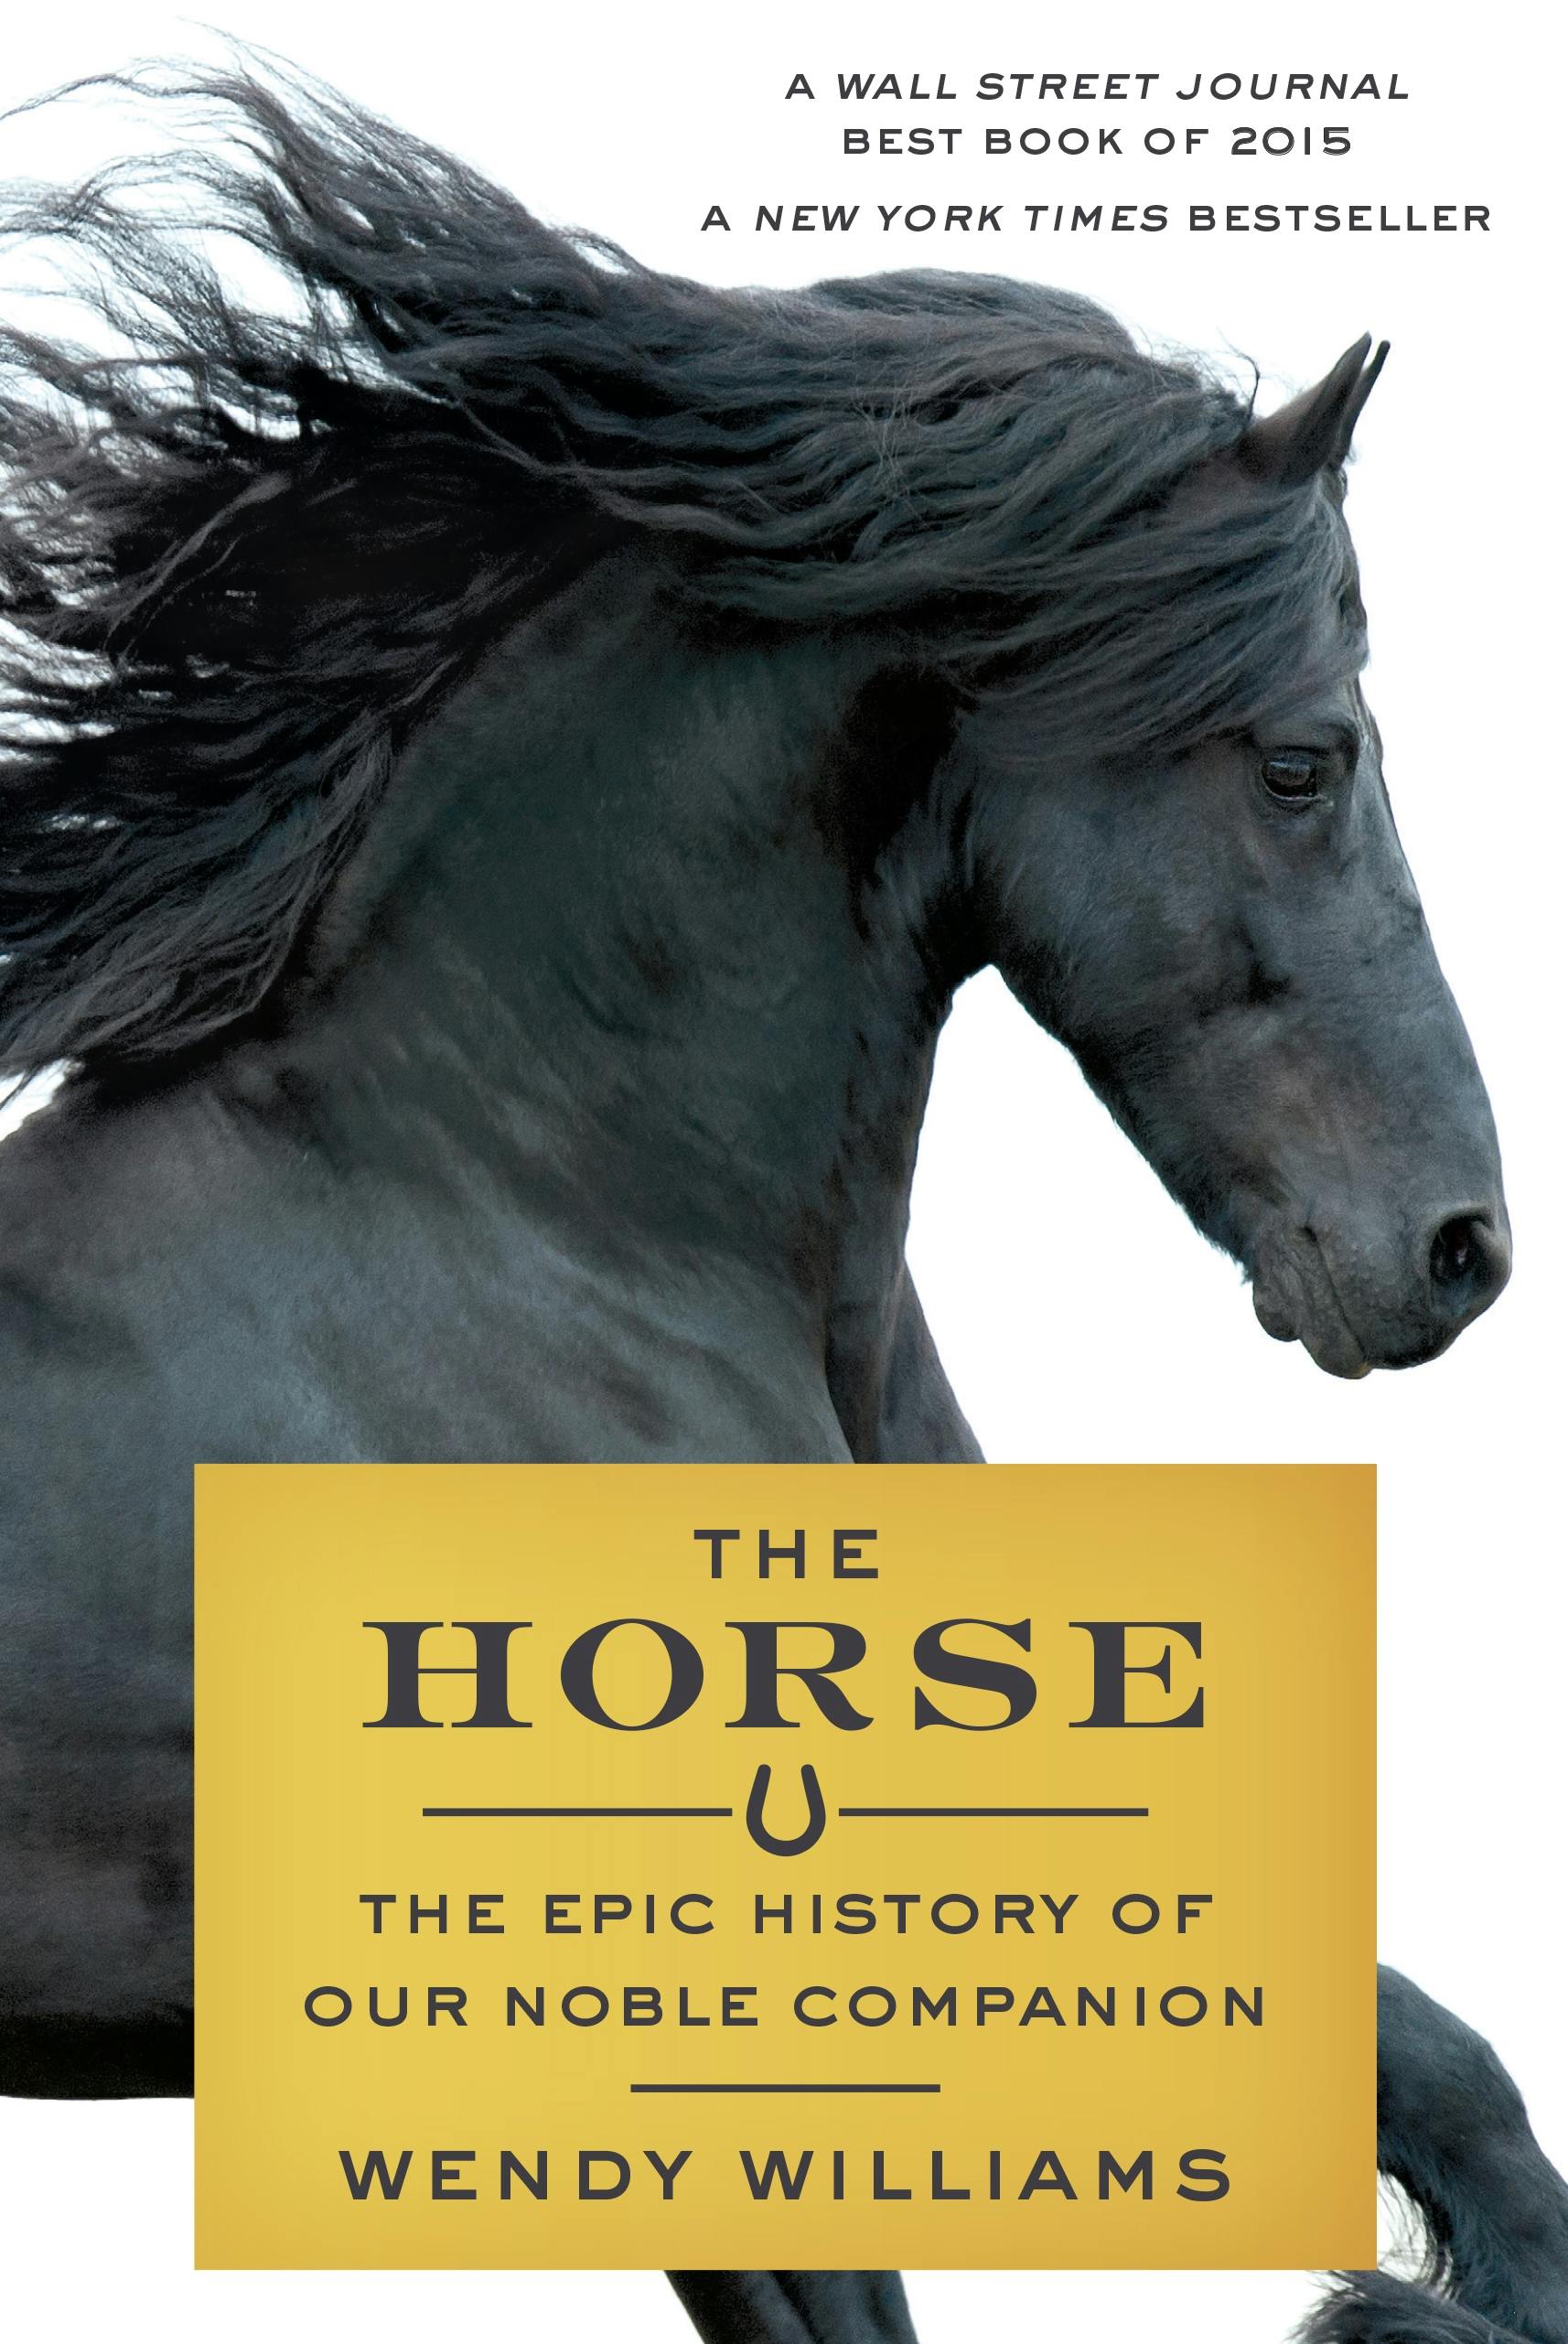 PDF) A Horse! A Horse! My Kingdom for a Horse!